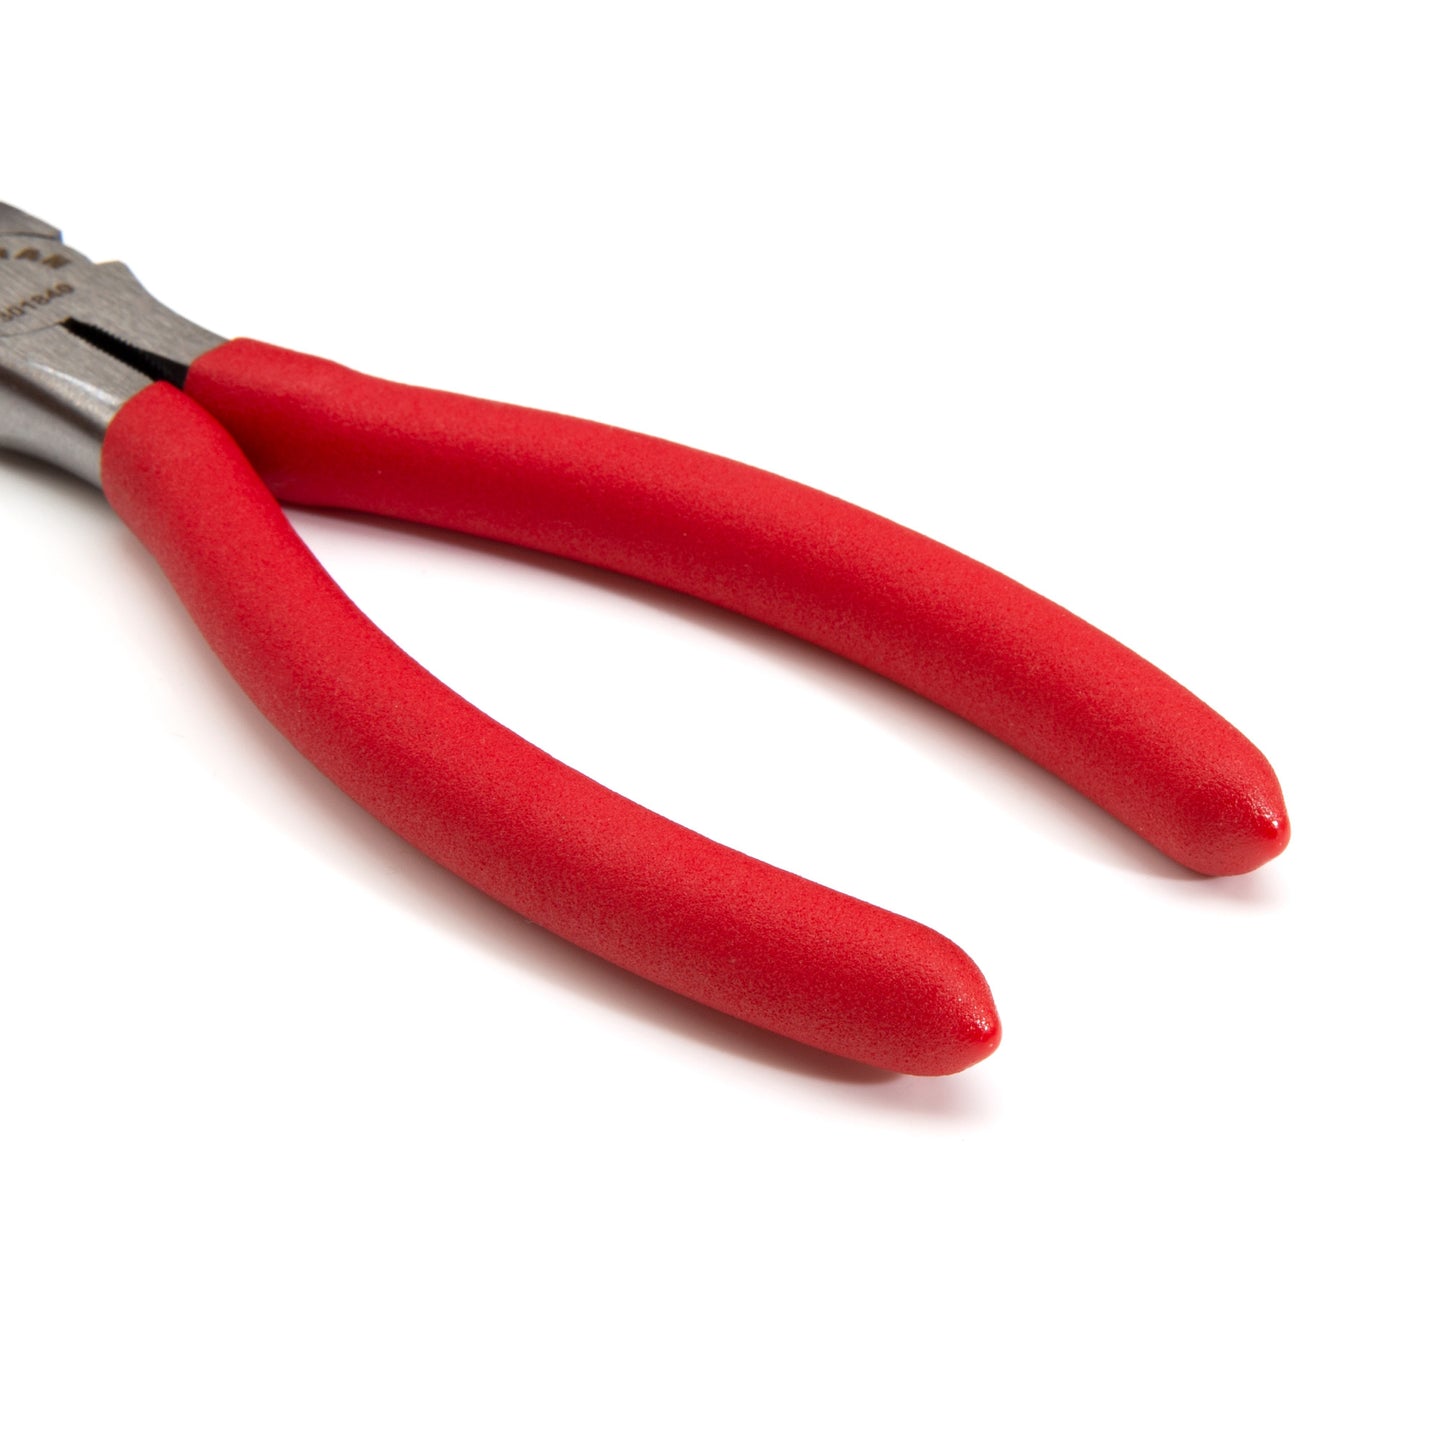 6-inch Diagonal Cutters / Pliers with Wire Puller